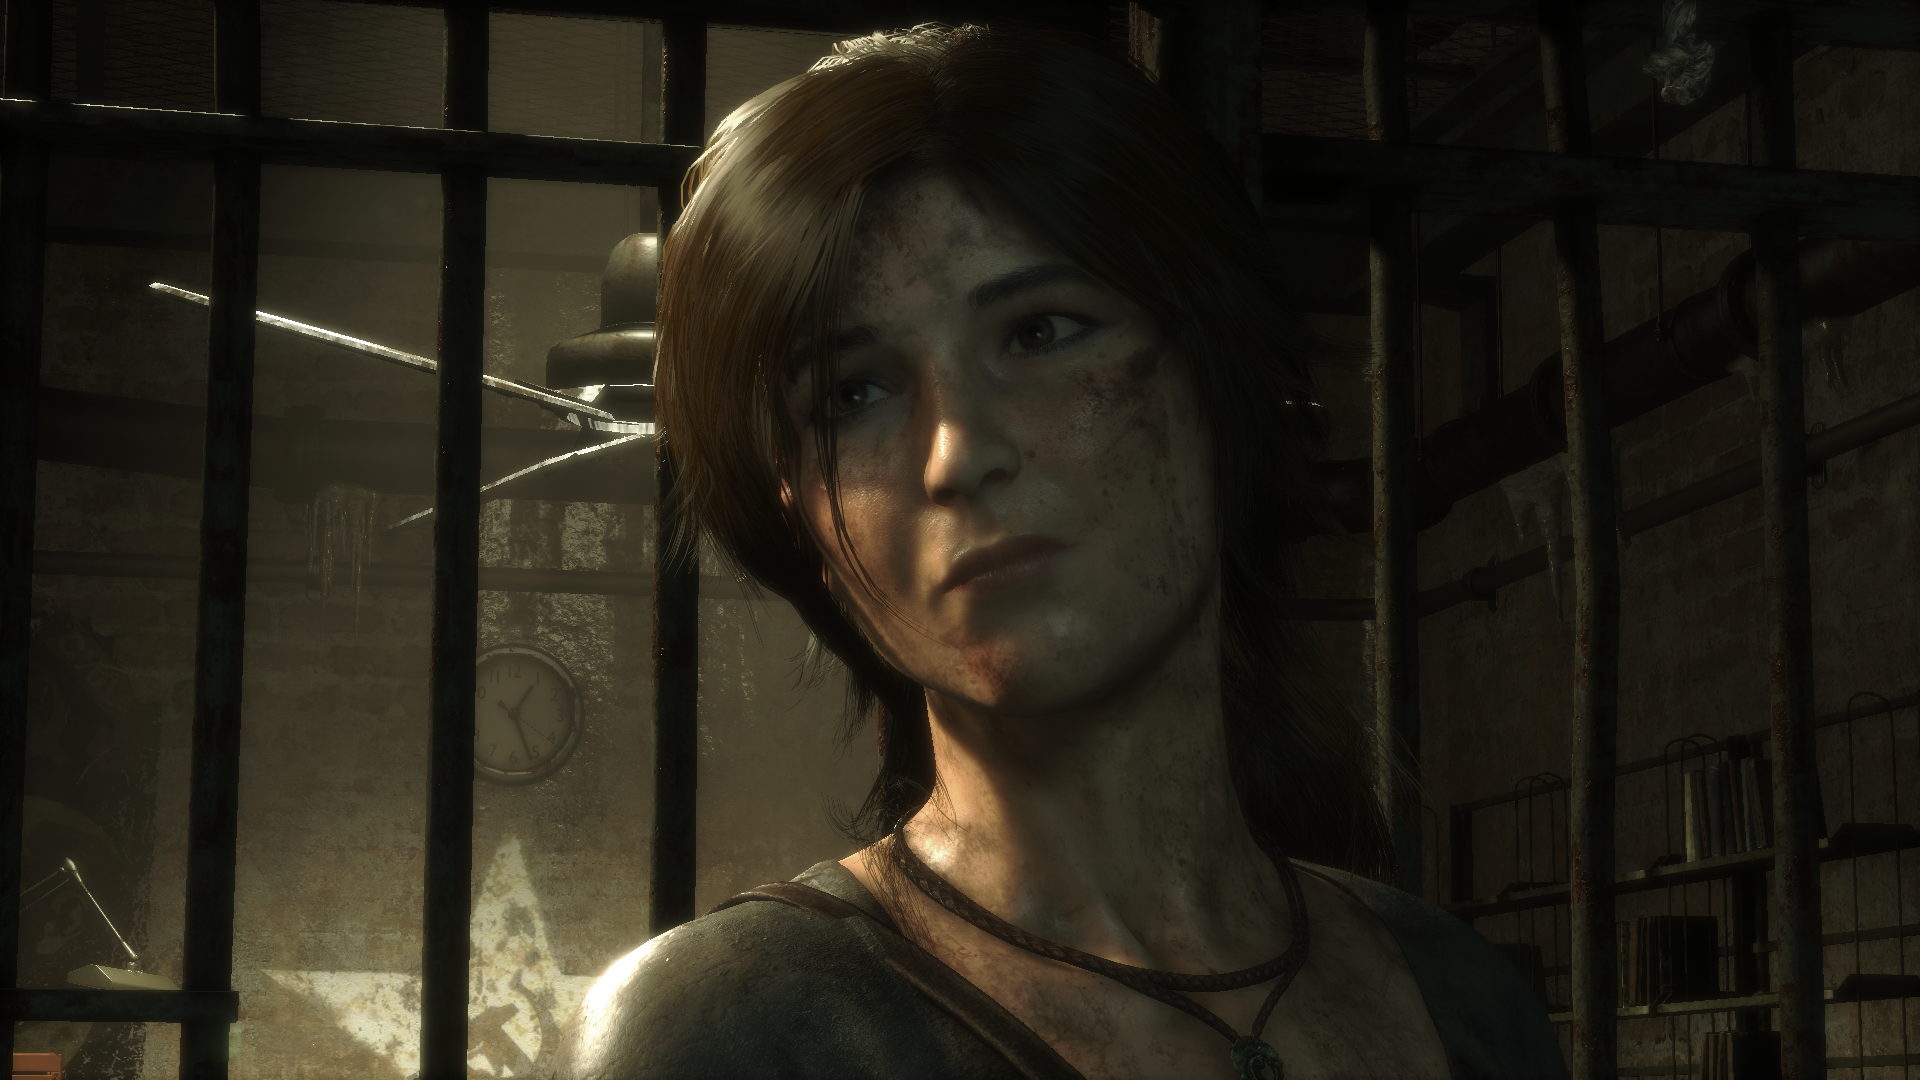 General 1920x1080 Rise of the Tomb Raider screen shot video games Tomb Raider PC gaming brunette dirt face necklace video game girls Lara Croft (Tomb Raider) video game characters closeup